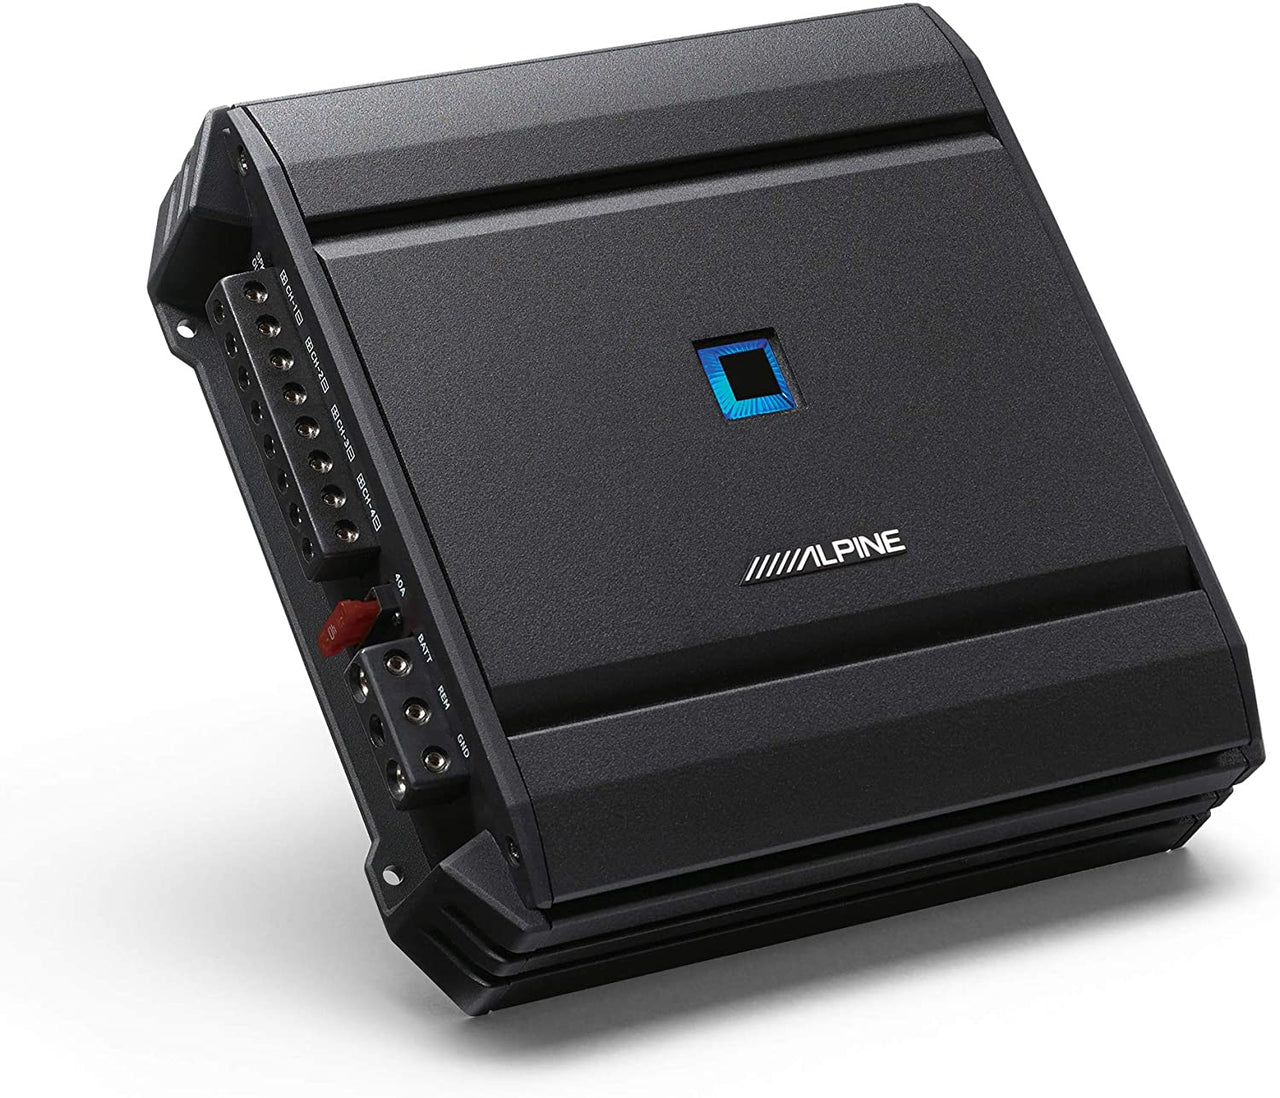 Alpine S-A32F 4 Channel Amplifier, S-S69 6X9 Coax Speakers, S-S50 5.25" Coax Speakers and Wiring Kit